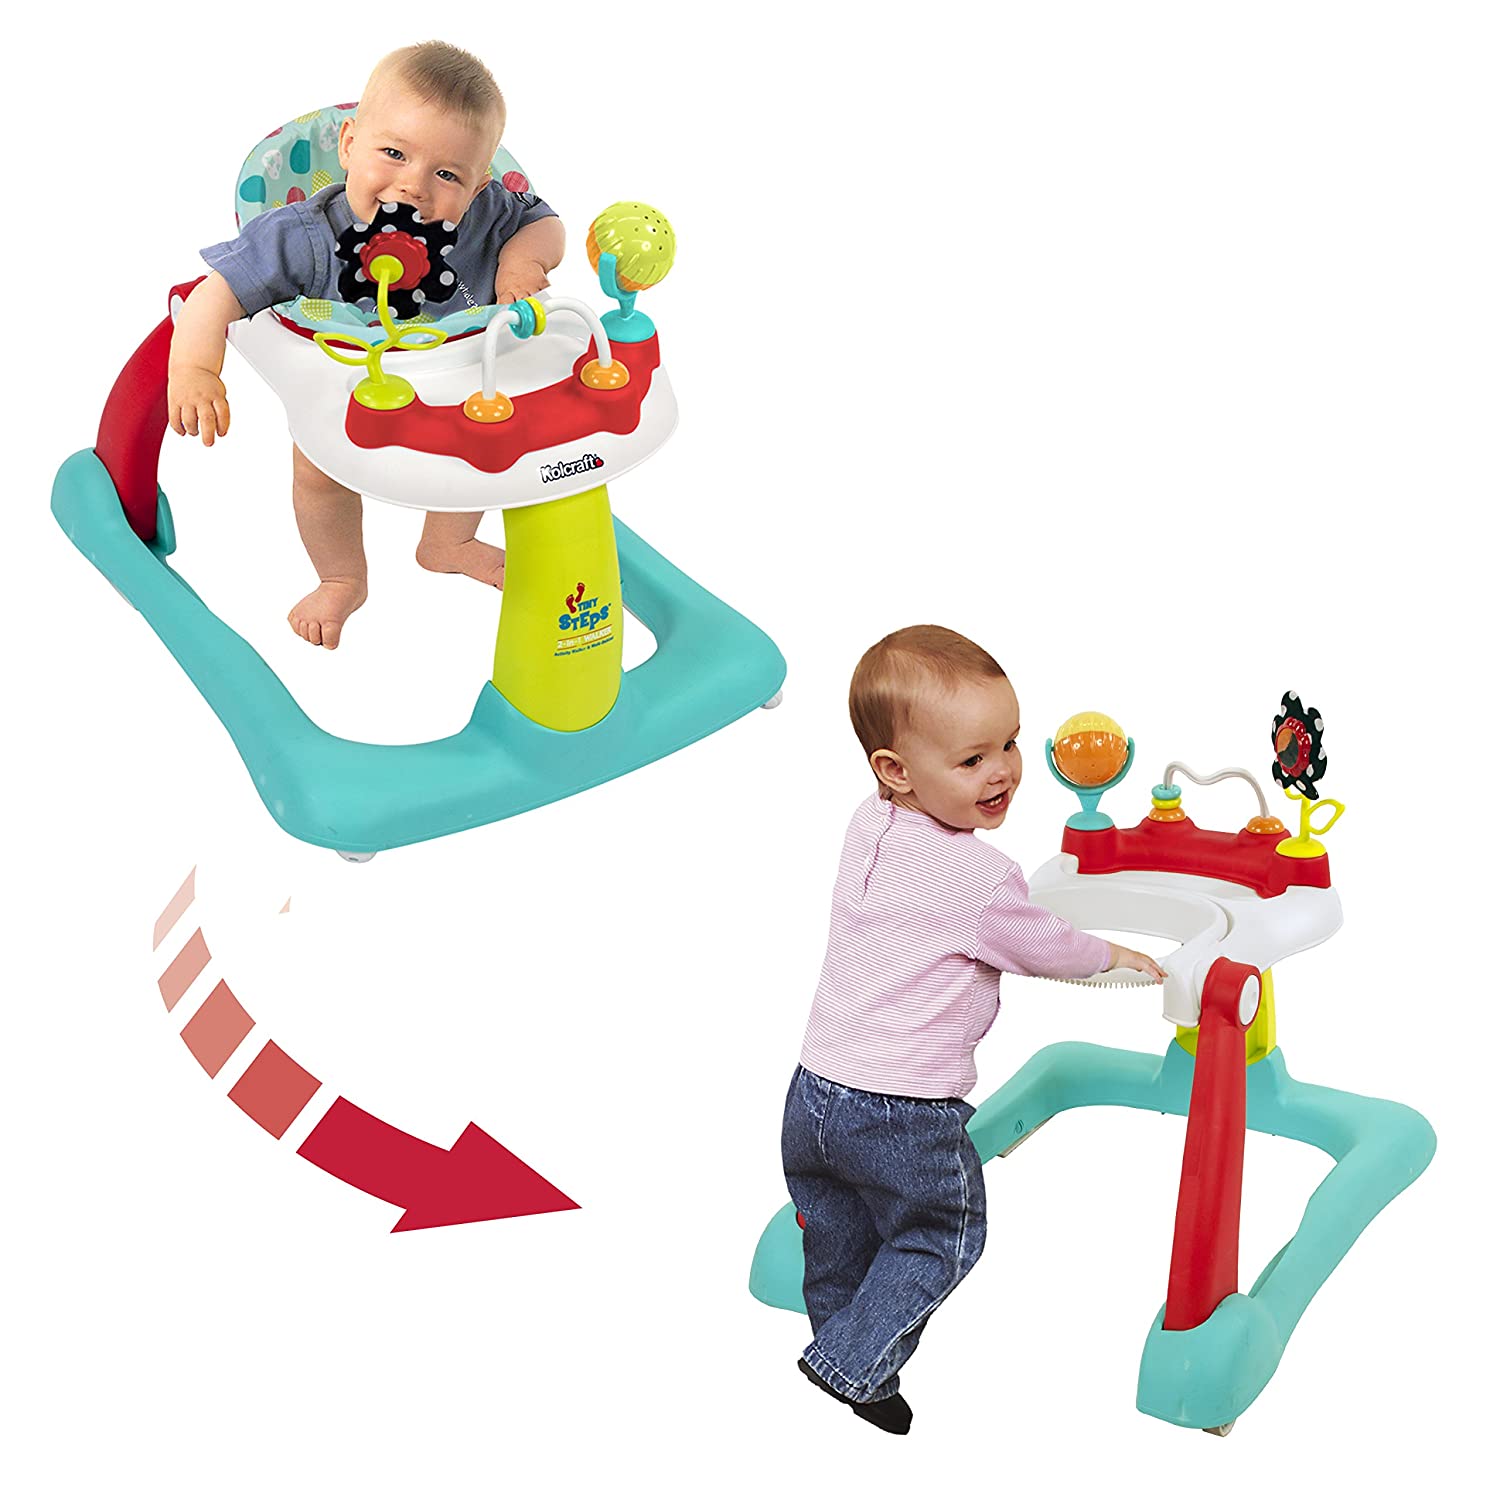 Kolcraft Tiny Steps 2 in 1 Infant and Baby Activity Walker